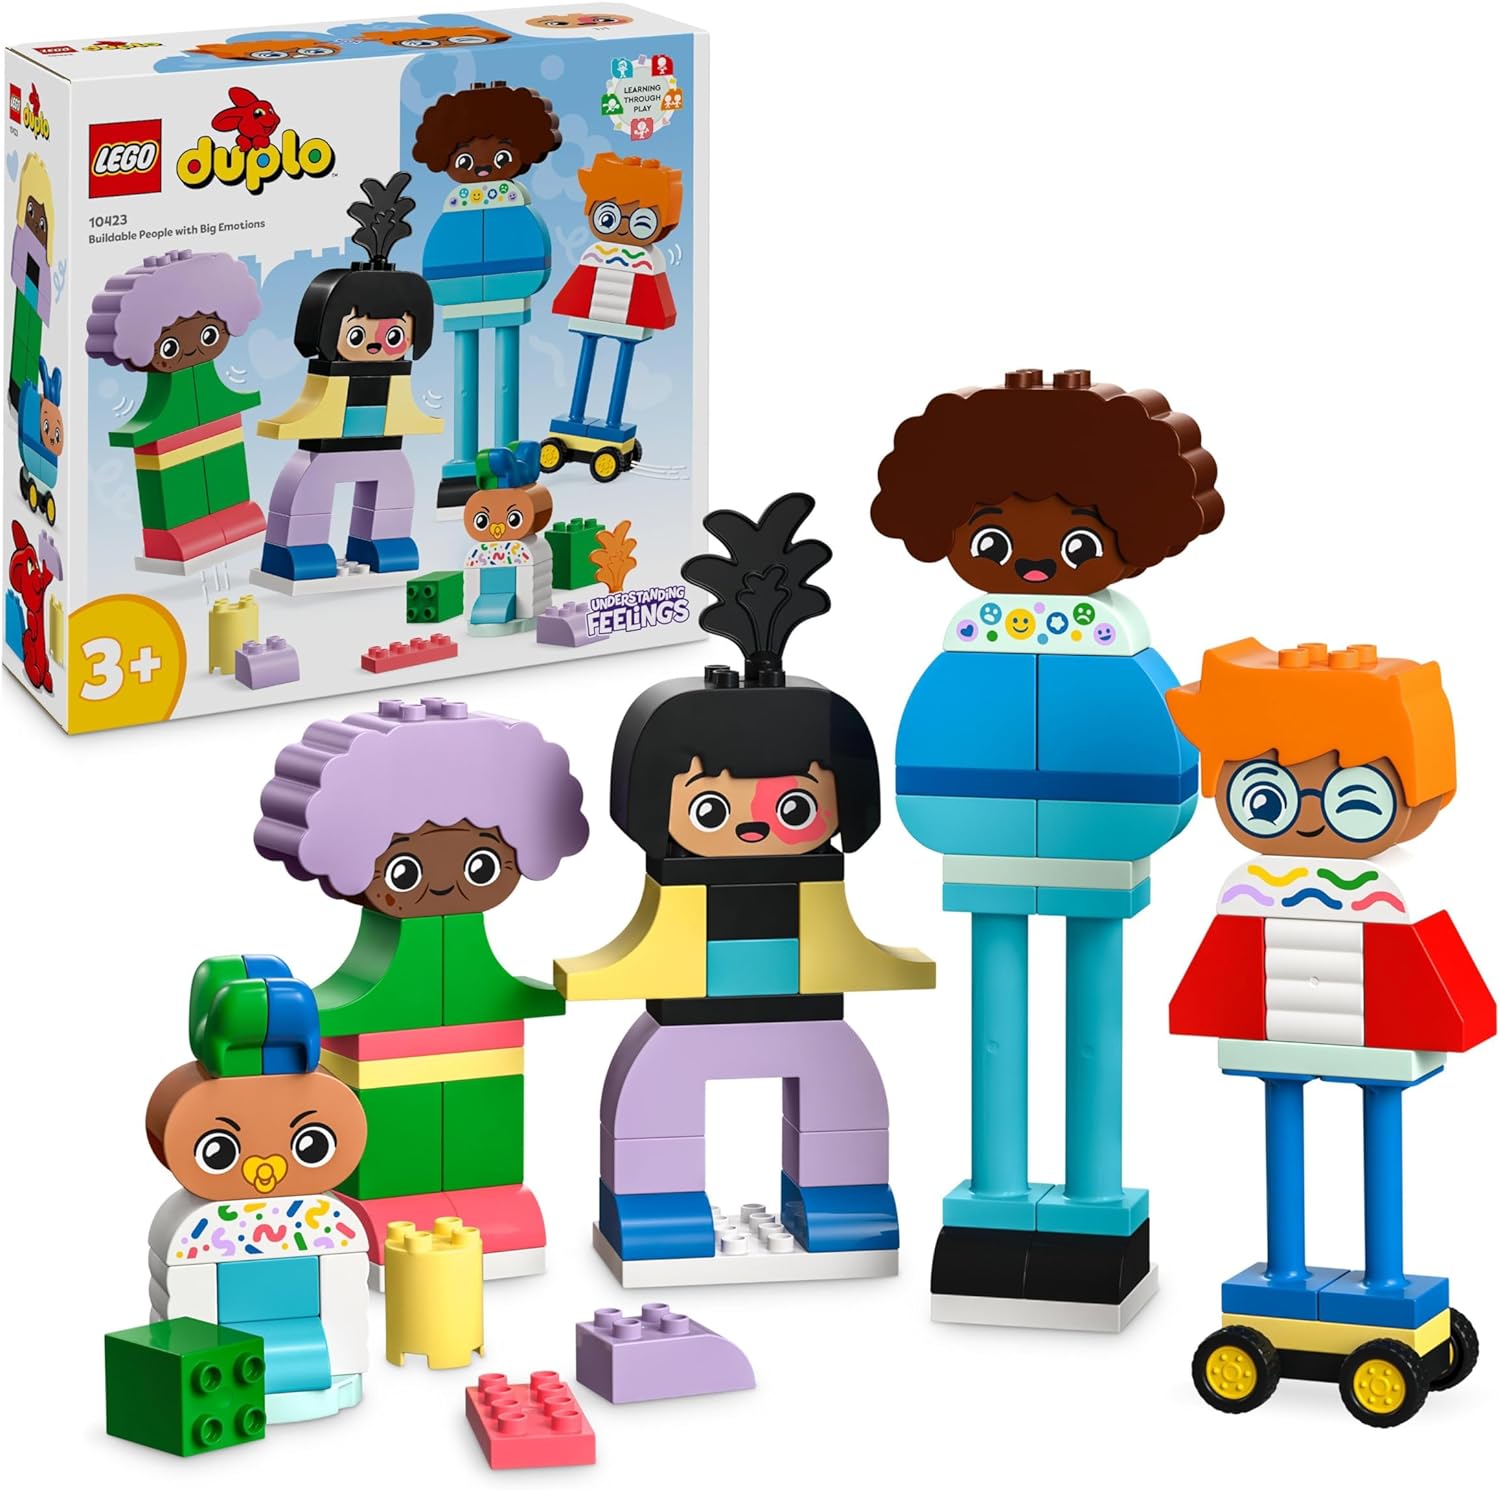 LEGO DUPLO Town Buildable People with Big Feelings, Educational Toy for Children from 3 Years, Includes 5 Figures with 10 Faces for Role Play, 71 Stones to Combine and Design 10423